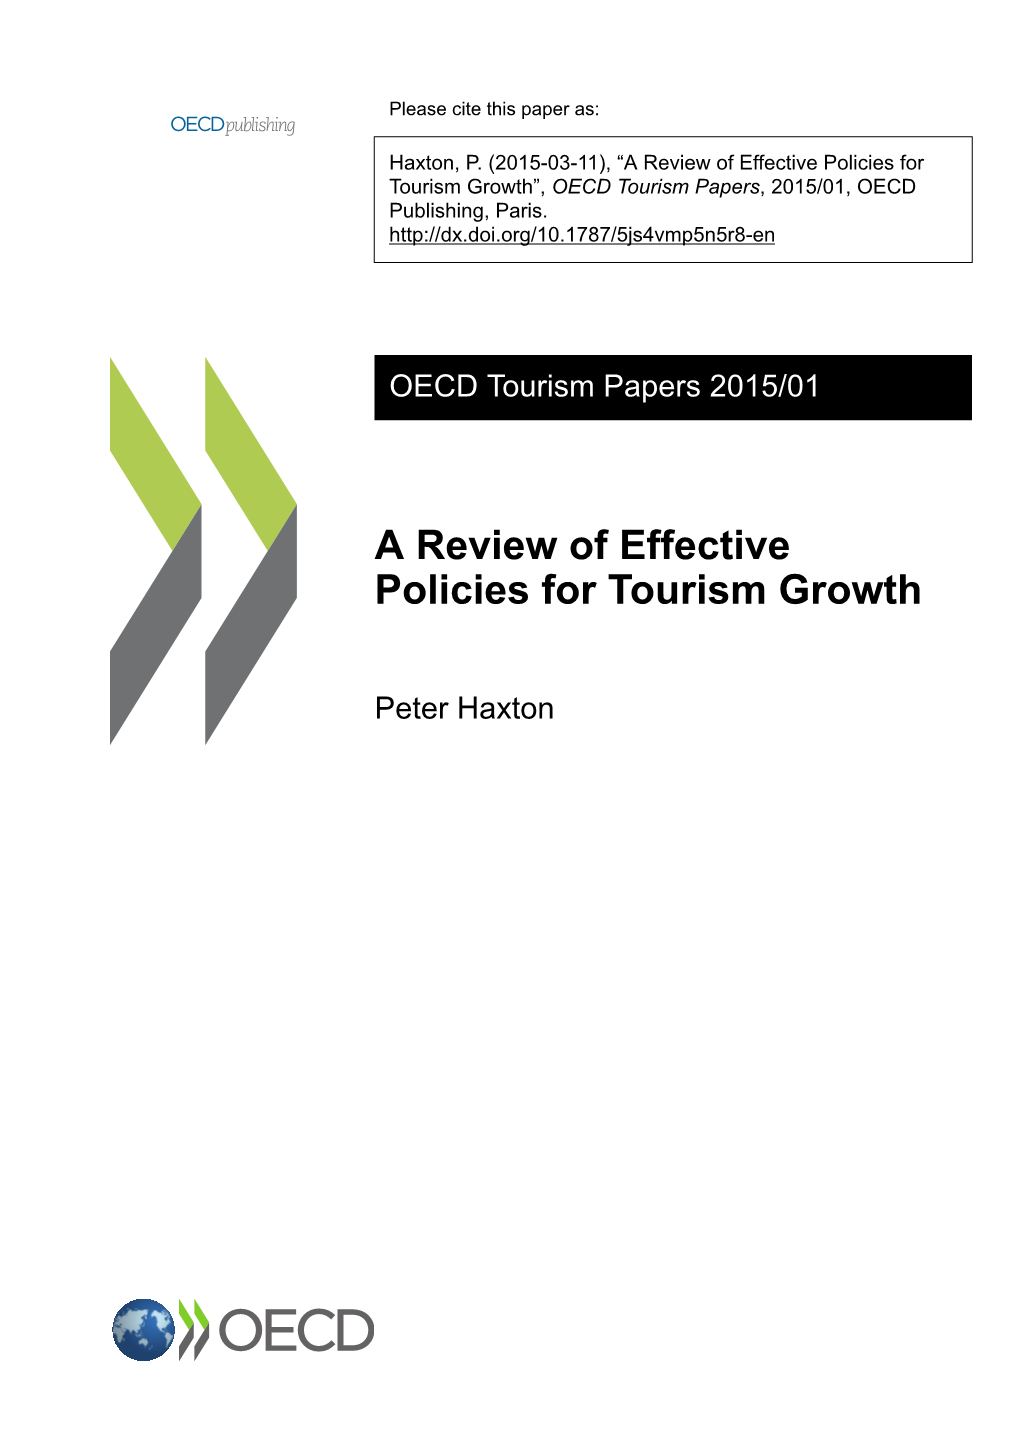 A Review of Effective Policies for Tourism Growth”, OECD Tourism Papers, 2015/01, OECD Publishing, Paris